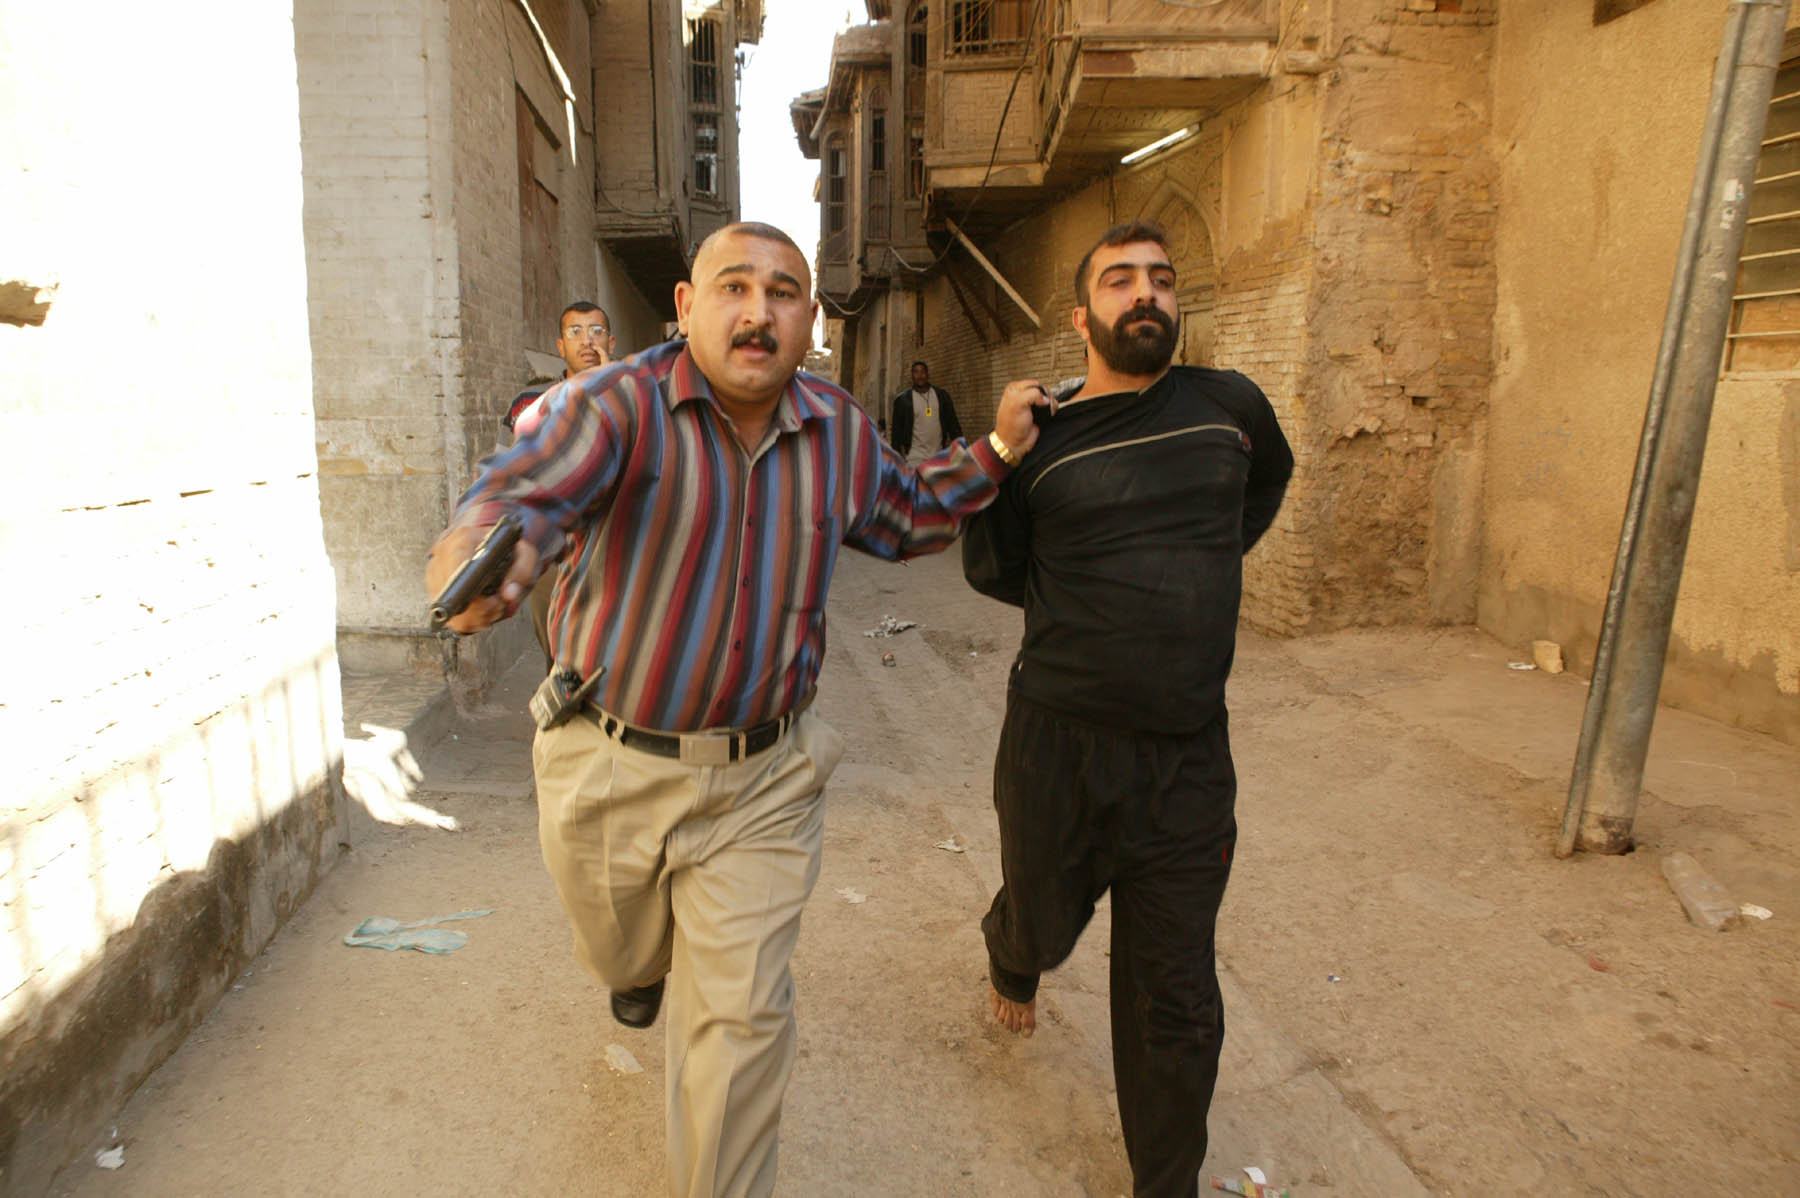 A member of the Iraqi Major Crimes Unit runs along a street with an arrested criminal (photo: Michael Kamber)